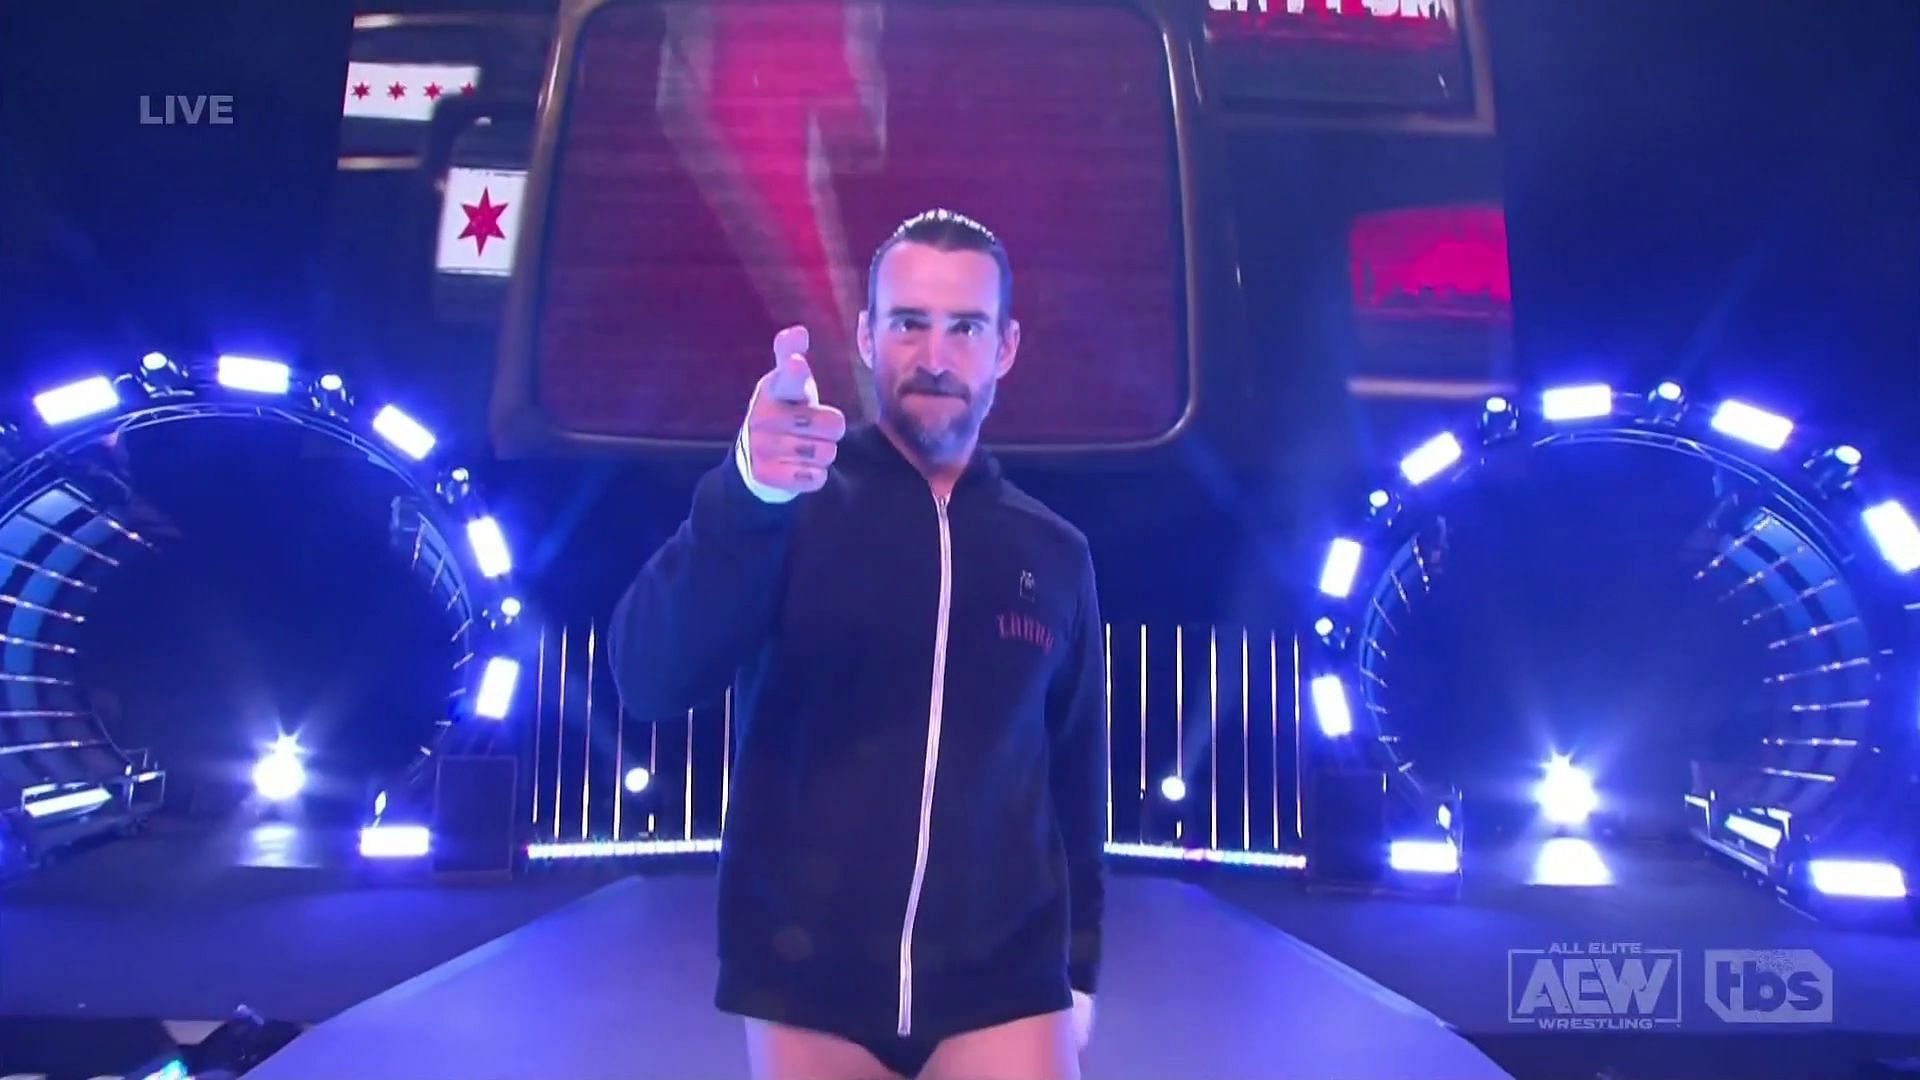 The Straight Edge star on his way to the ring during Dynamite.